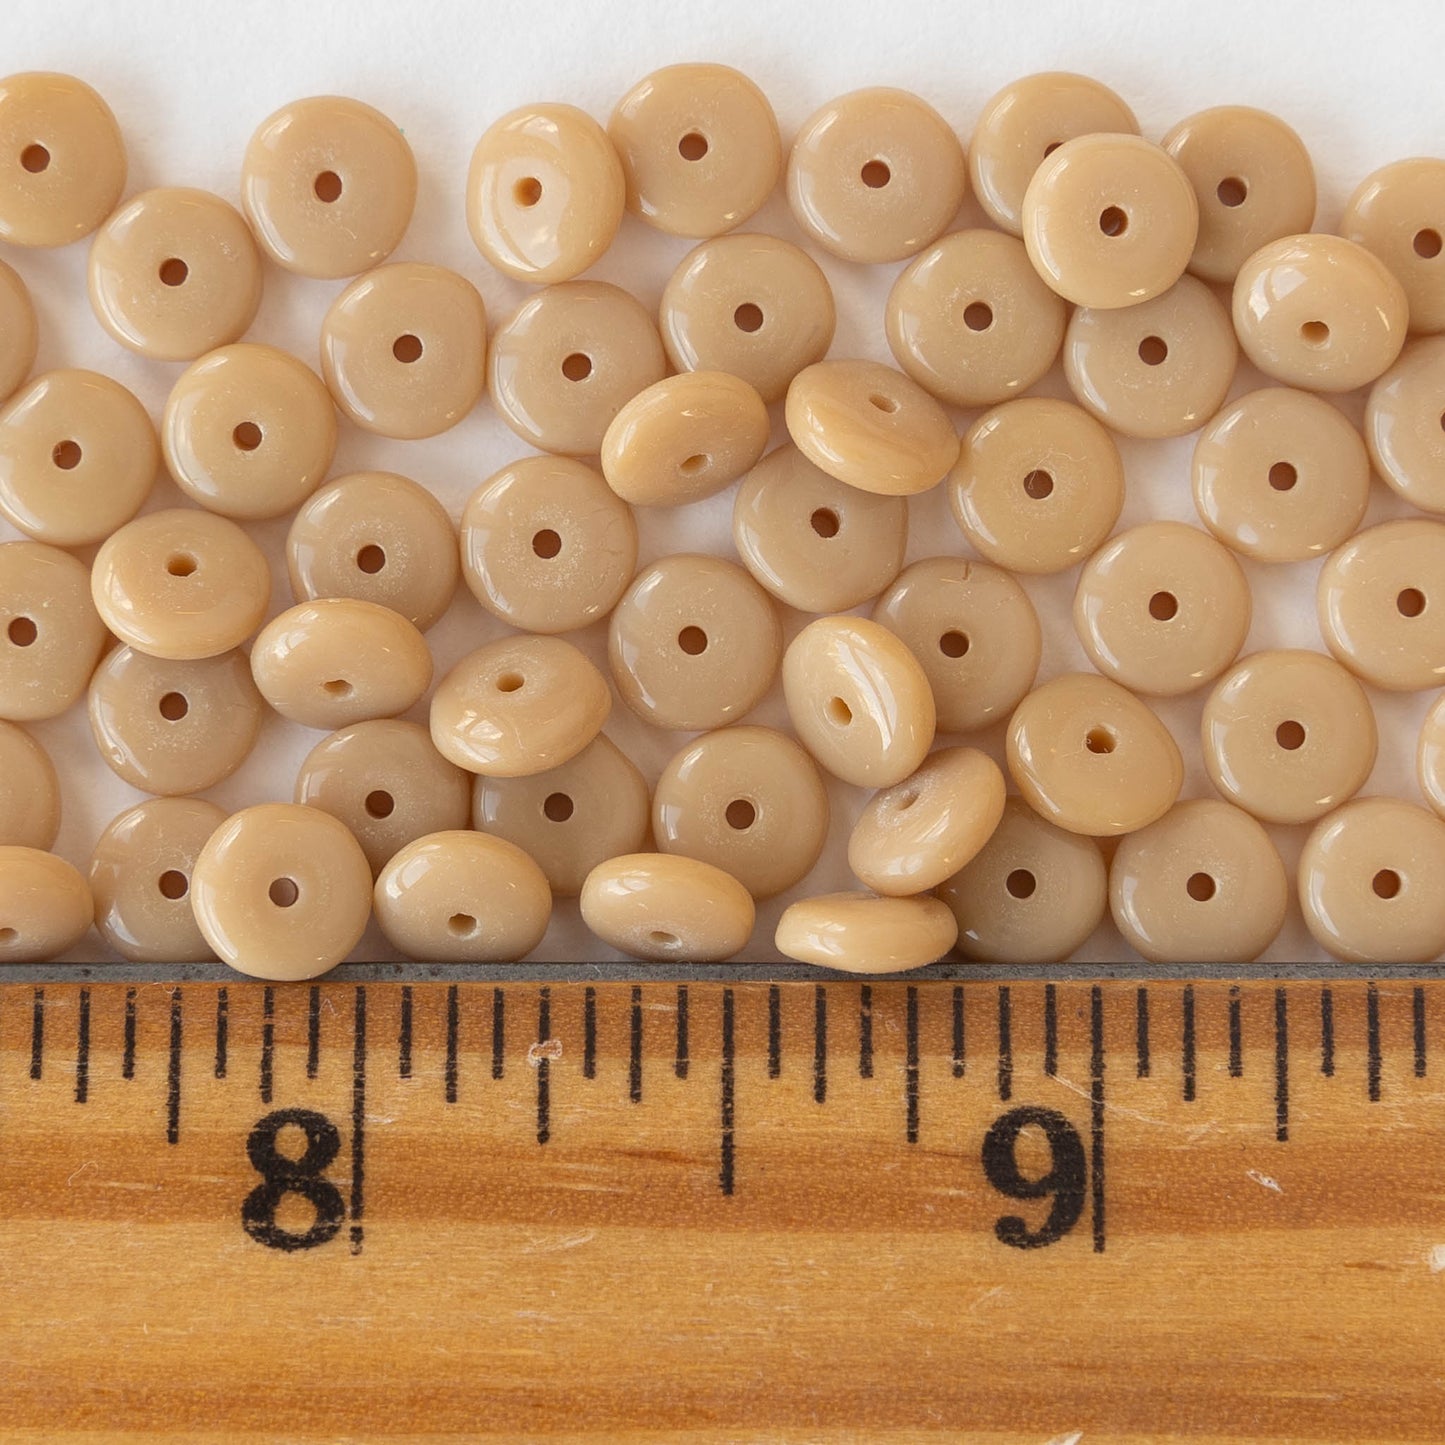 6mm Glass Rondelle Beads - Opaque Beige - 100 Beads